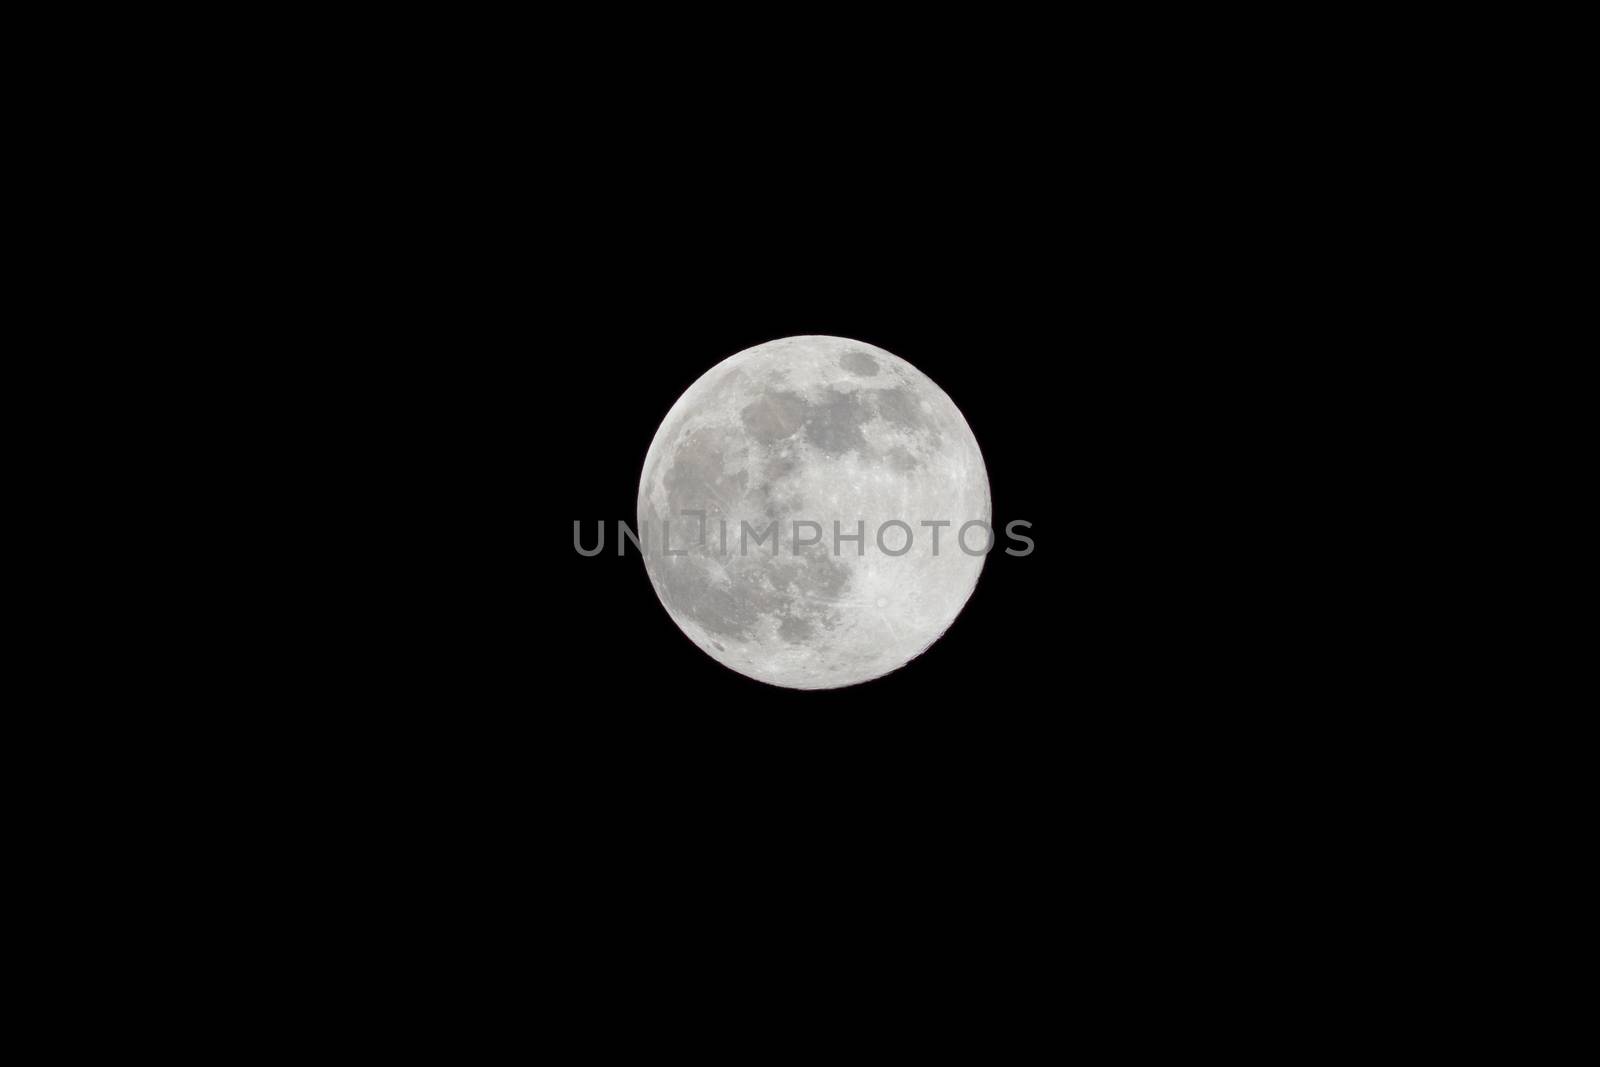 Full Moon isolated as Supermoon night with the closest approach the Moon makes to the Earth on its elliptical orbit, resulting in the largest apparent size of the lunar disk as seen from Earth.